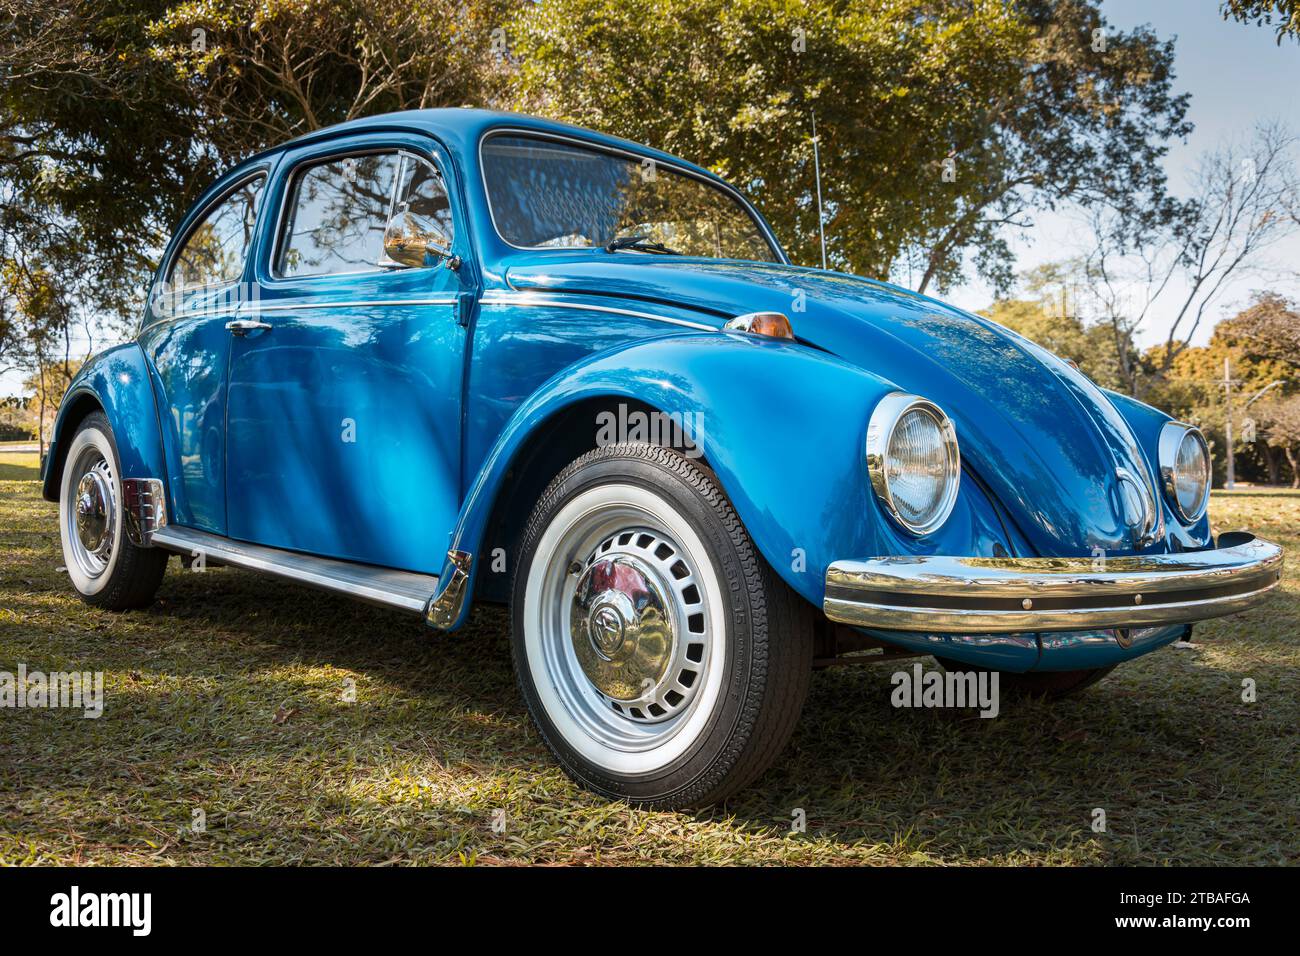 Vehicle Volkswagen Beetle Fusca model 1300 on display at the monthly meeting of vintage cars in the city of Londrina, Brazil. Stock Photo